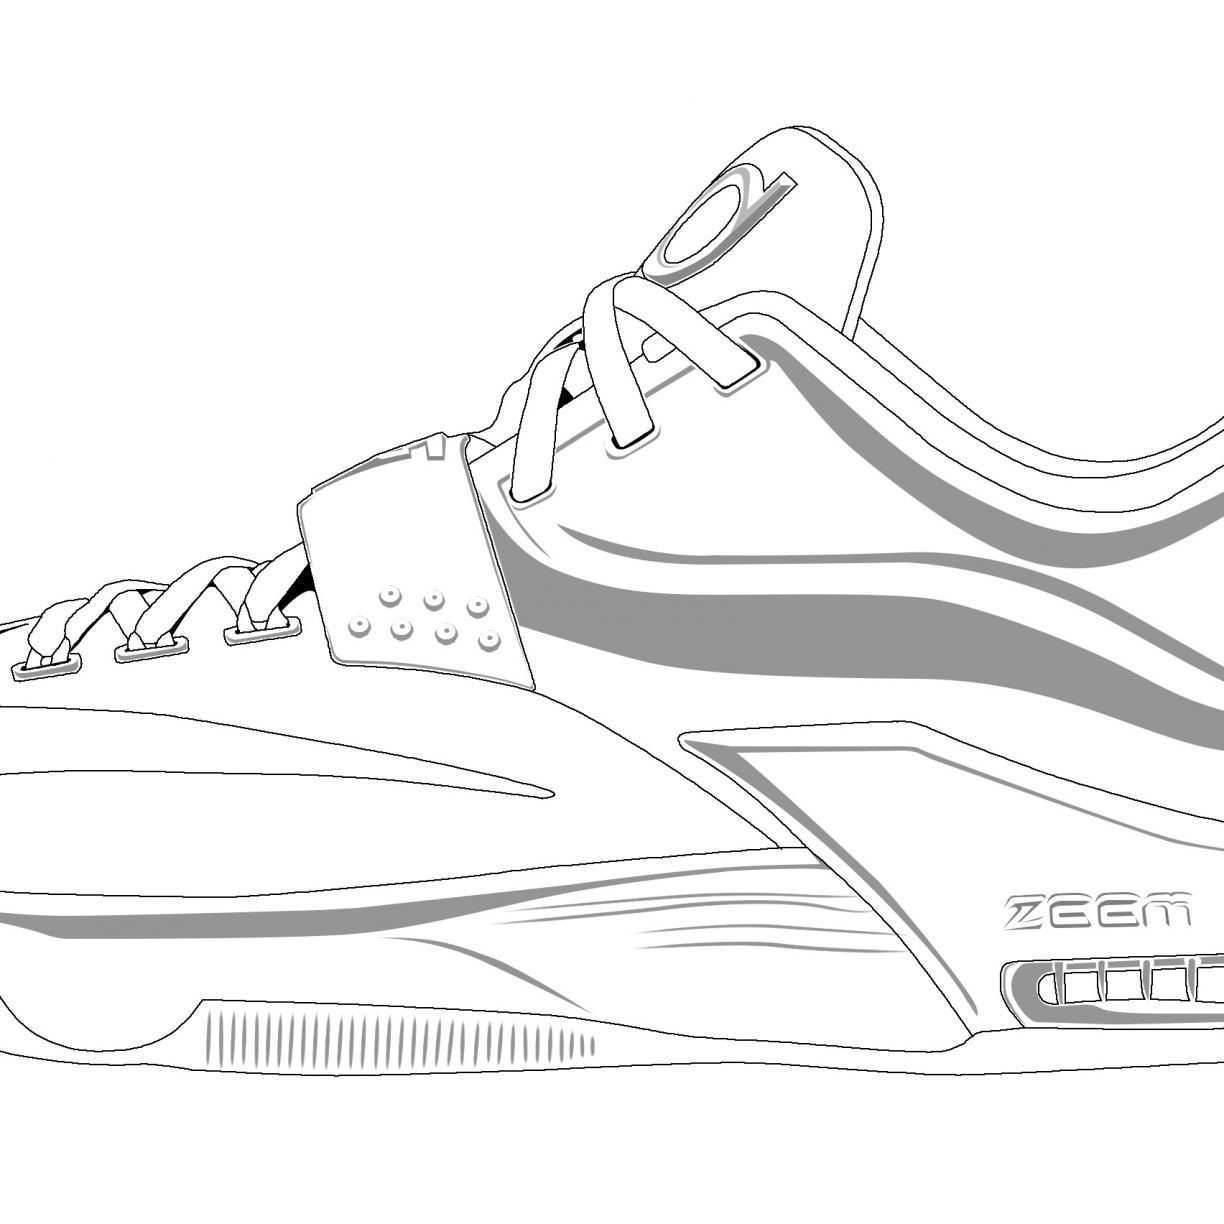 Lebron Shoes Coloring Pages Sneaker Coloring Page Printable Fresh Coloring Pages Lebron Shoes